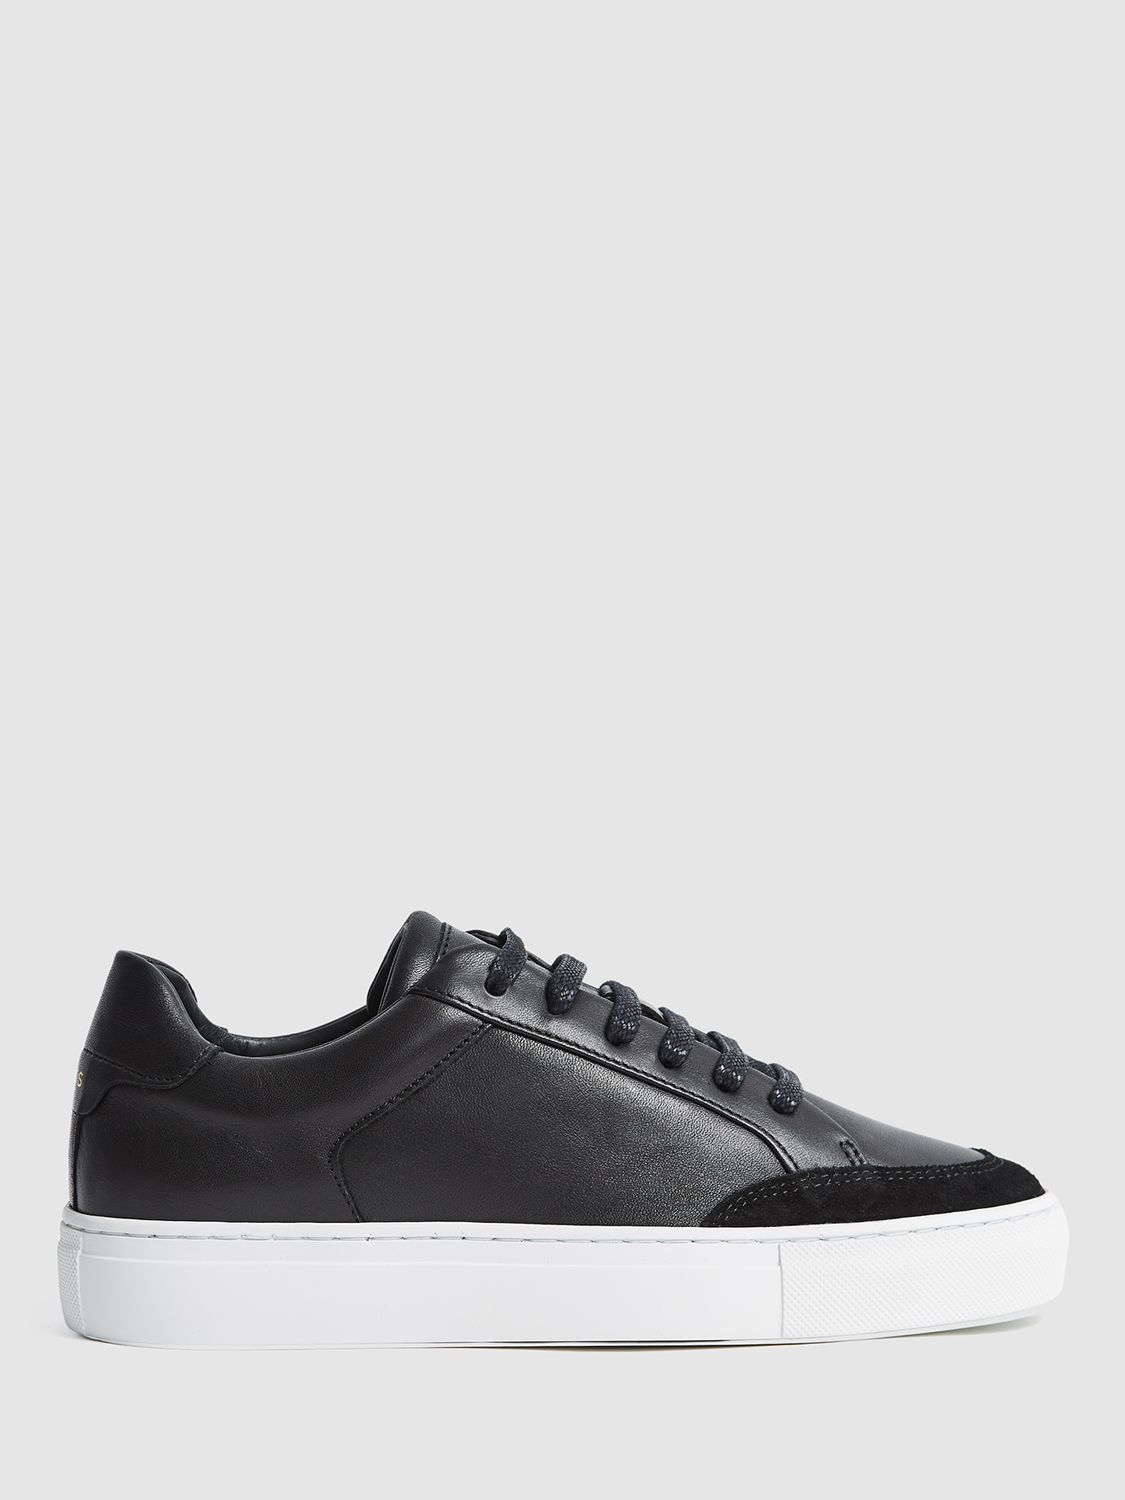 Reiss Ashley Leather and Suede Low Top Trainers, Black at John Lewis ...